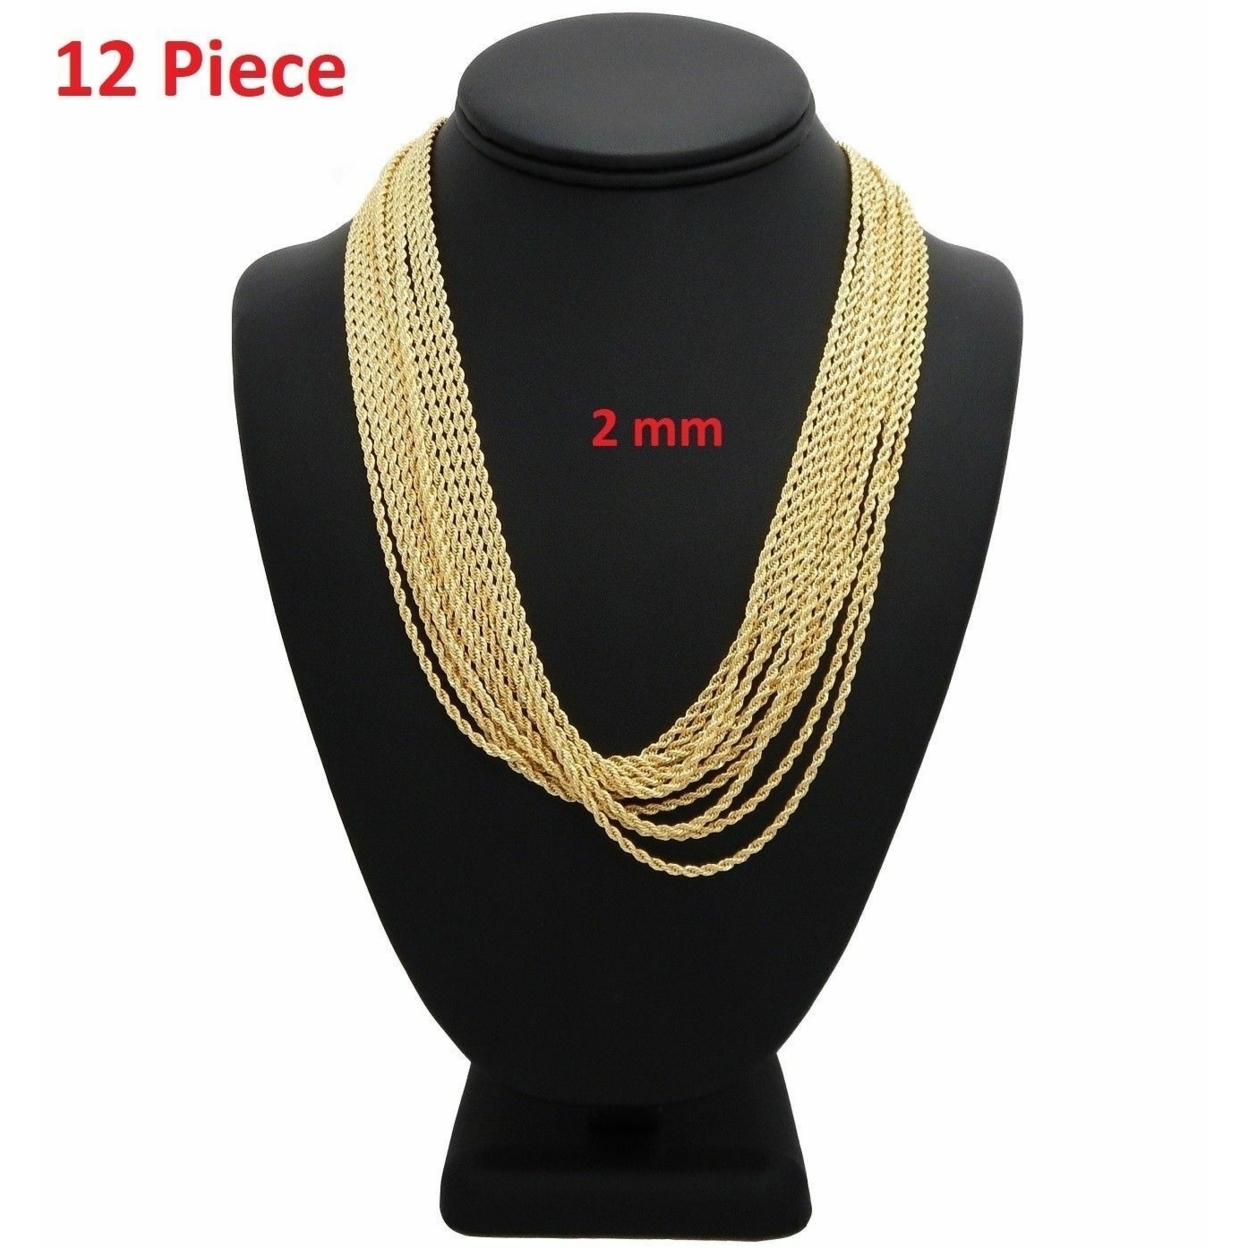 12 Piece Italy Rope Chain Necklace 2mm 24 Inch 14k Gold Filled High Polish Finsh Wholesale Lots